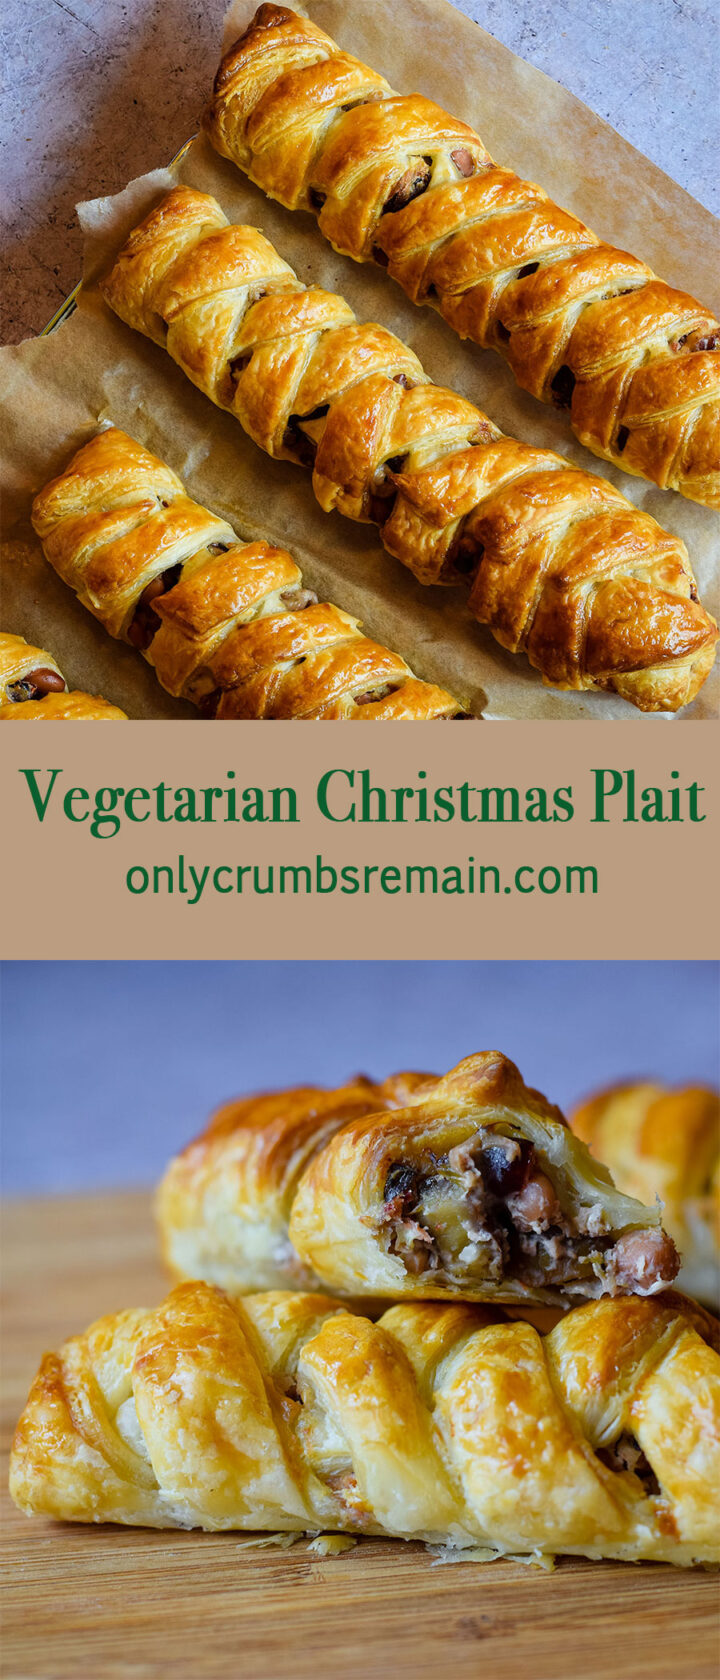 Vegetarian Christmas plait whole and cut open.